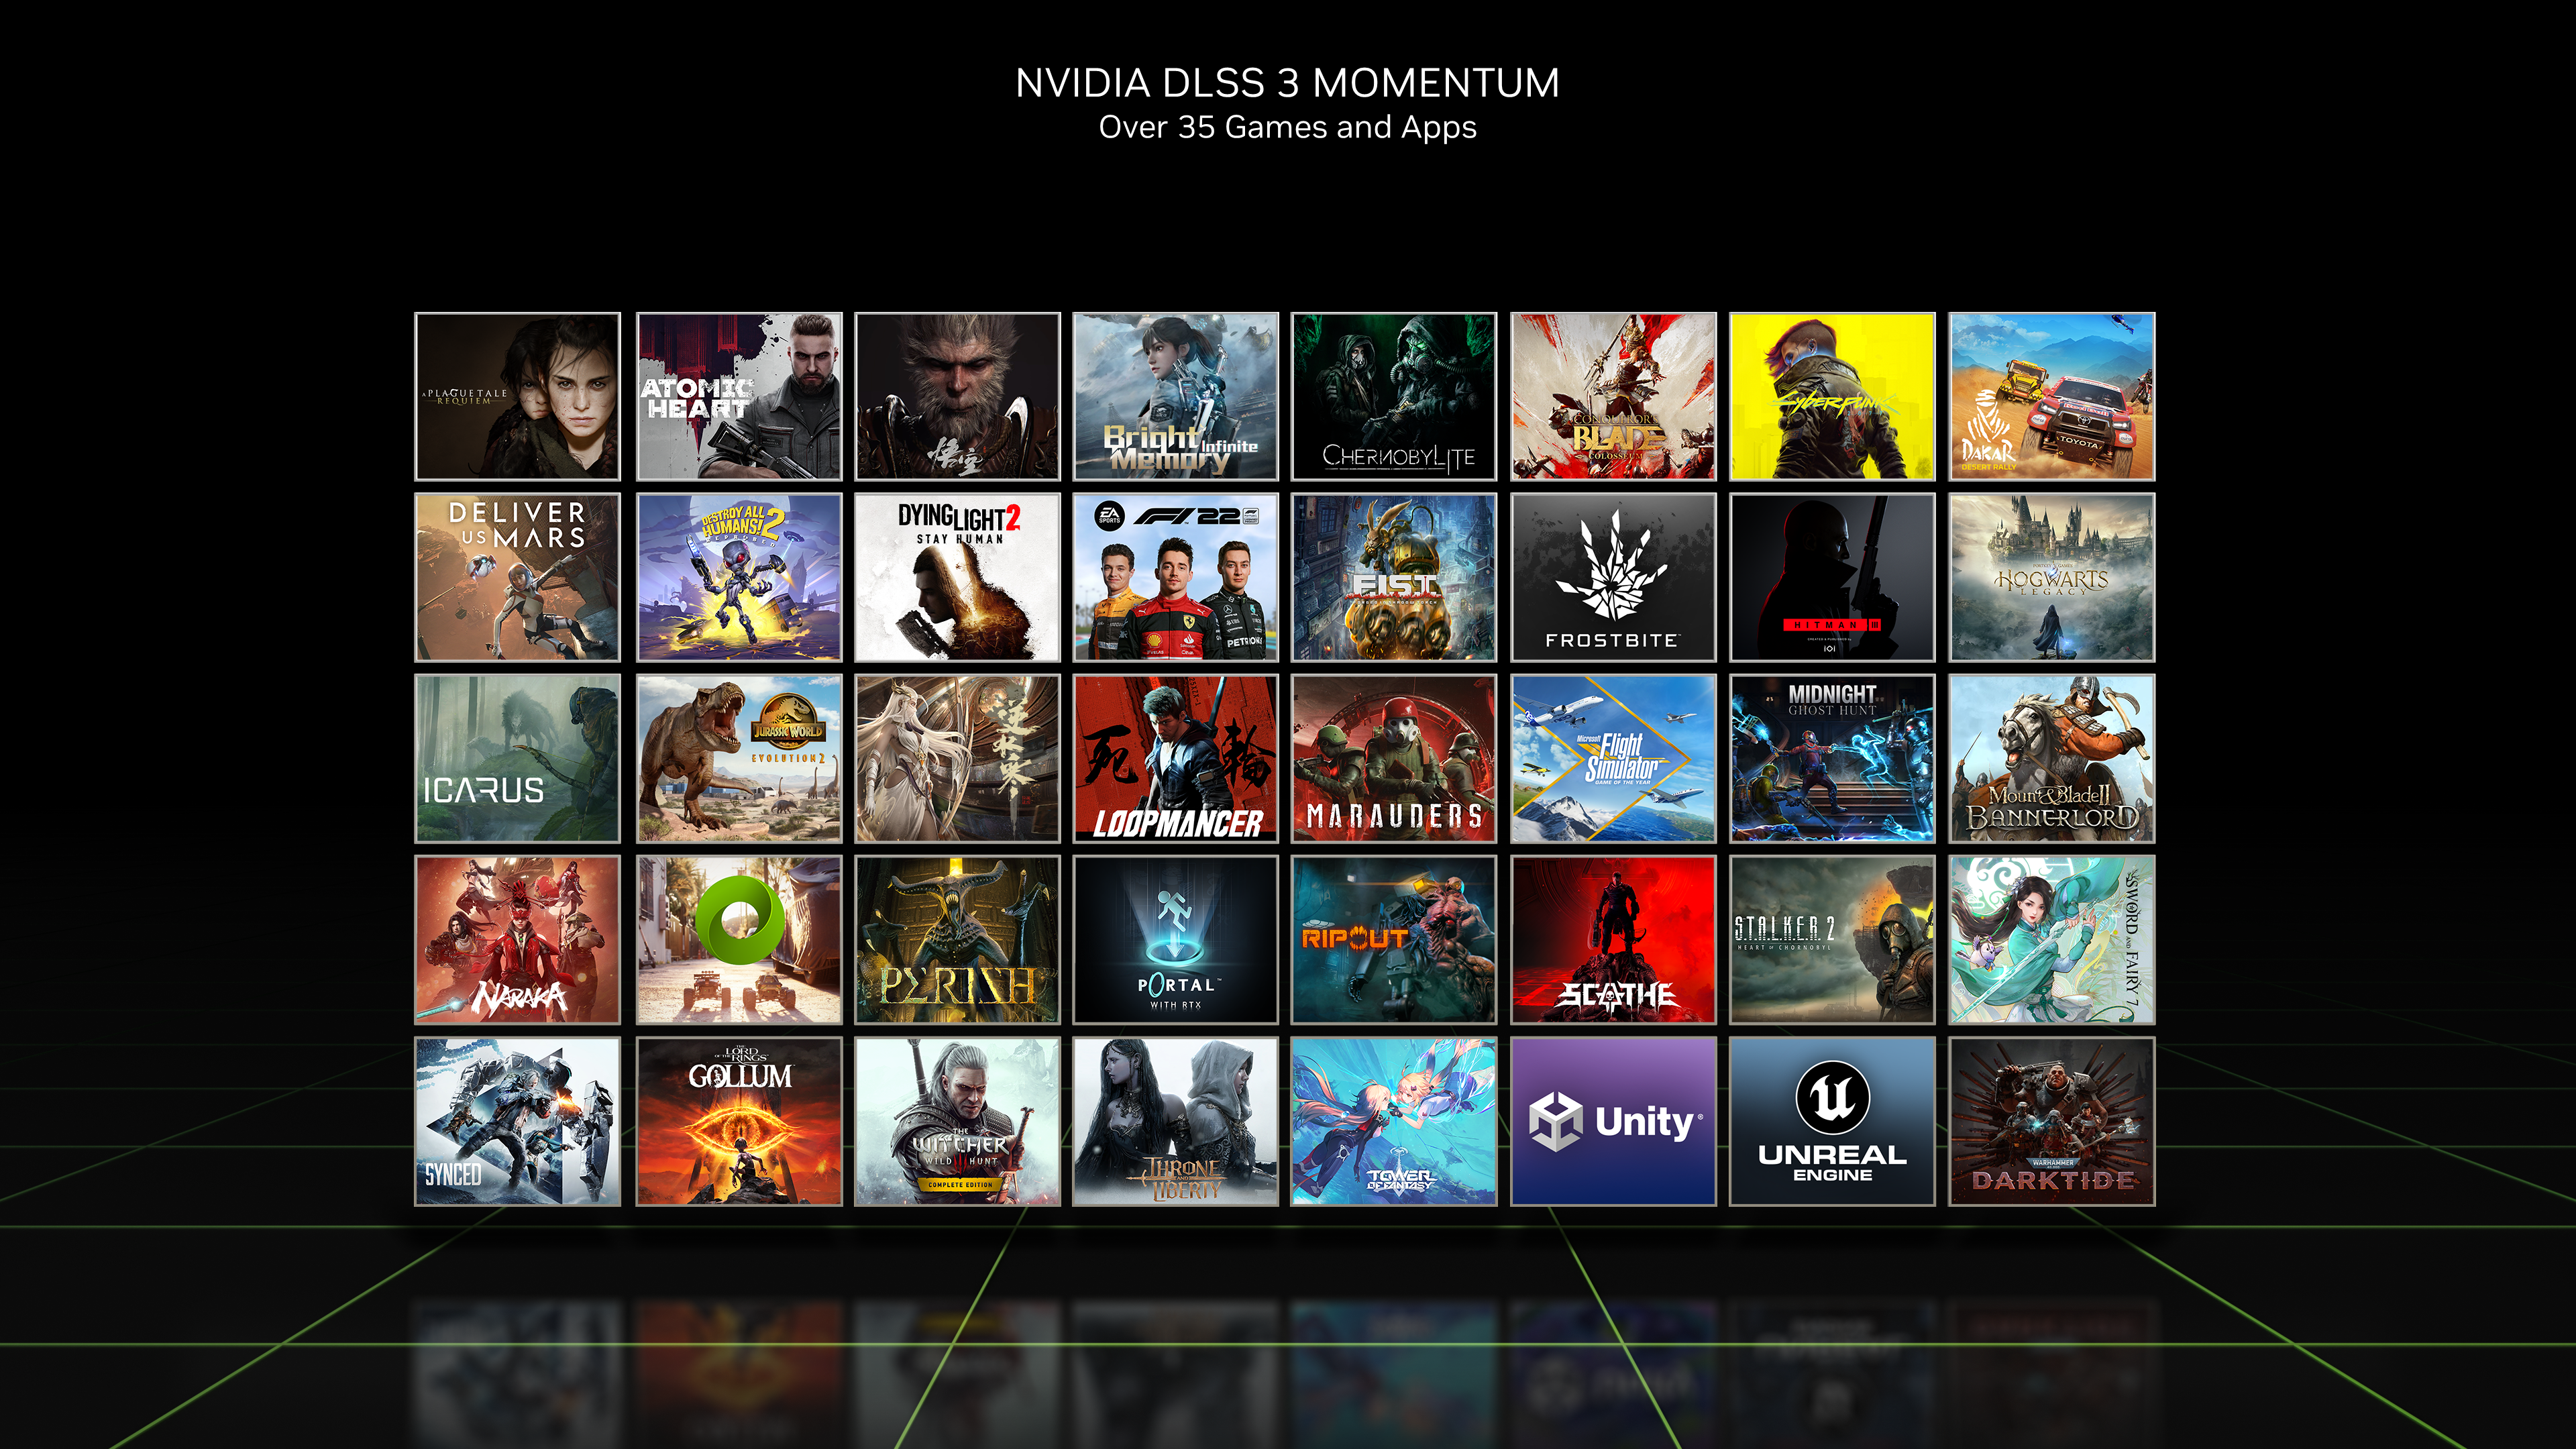 A collage showing the initial games to support Nvidia DLSS 3.